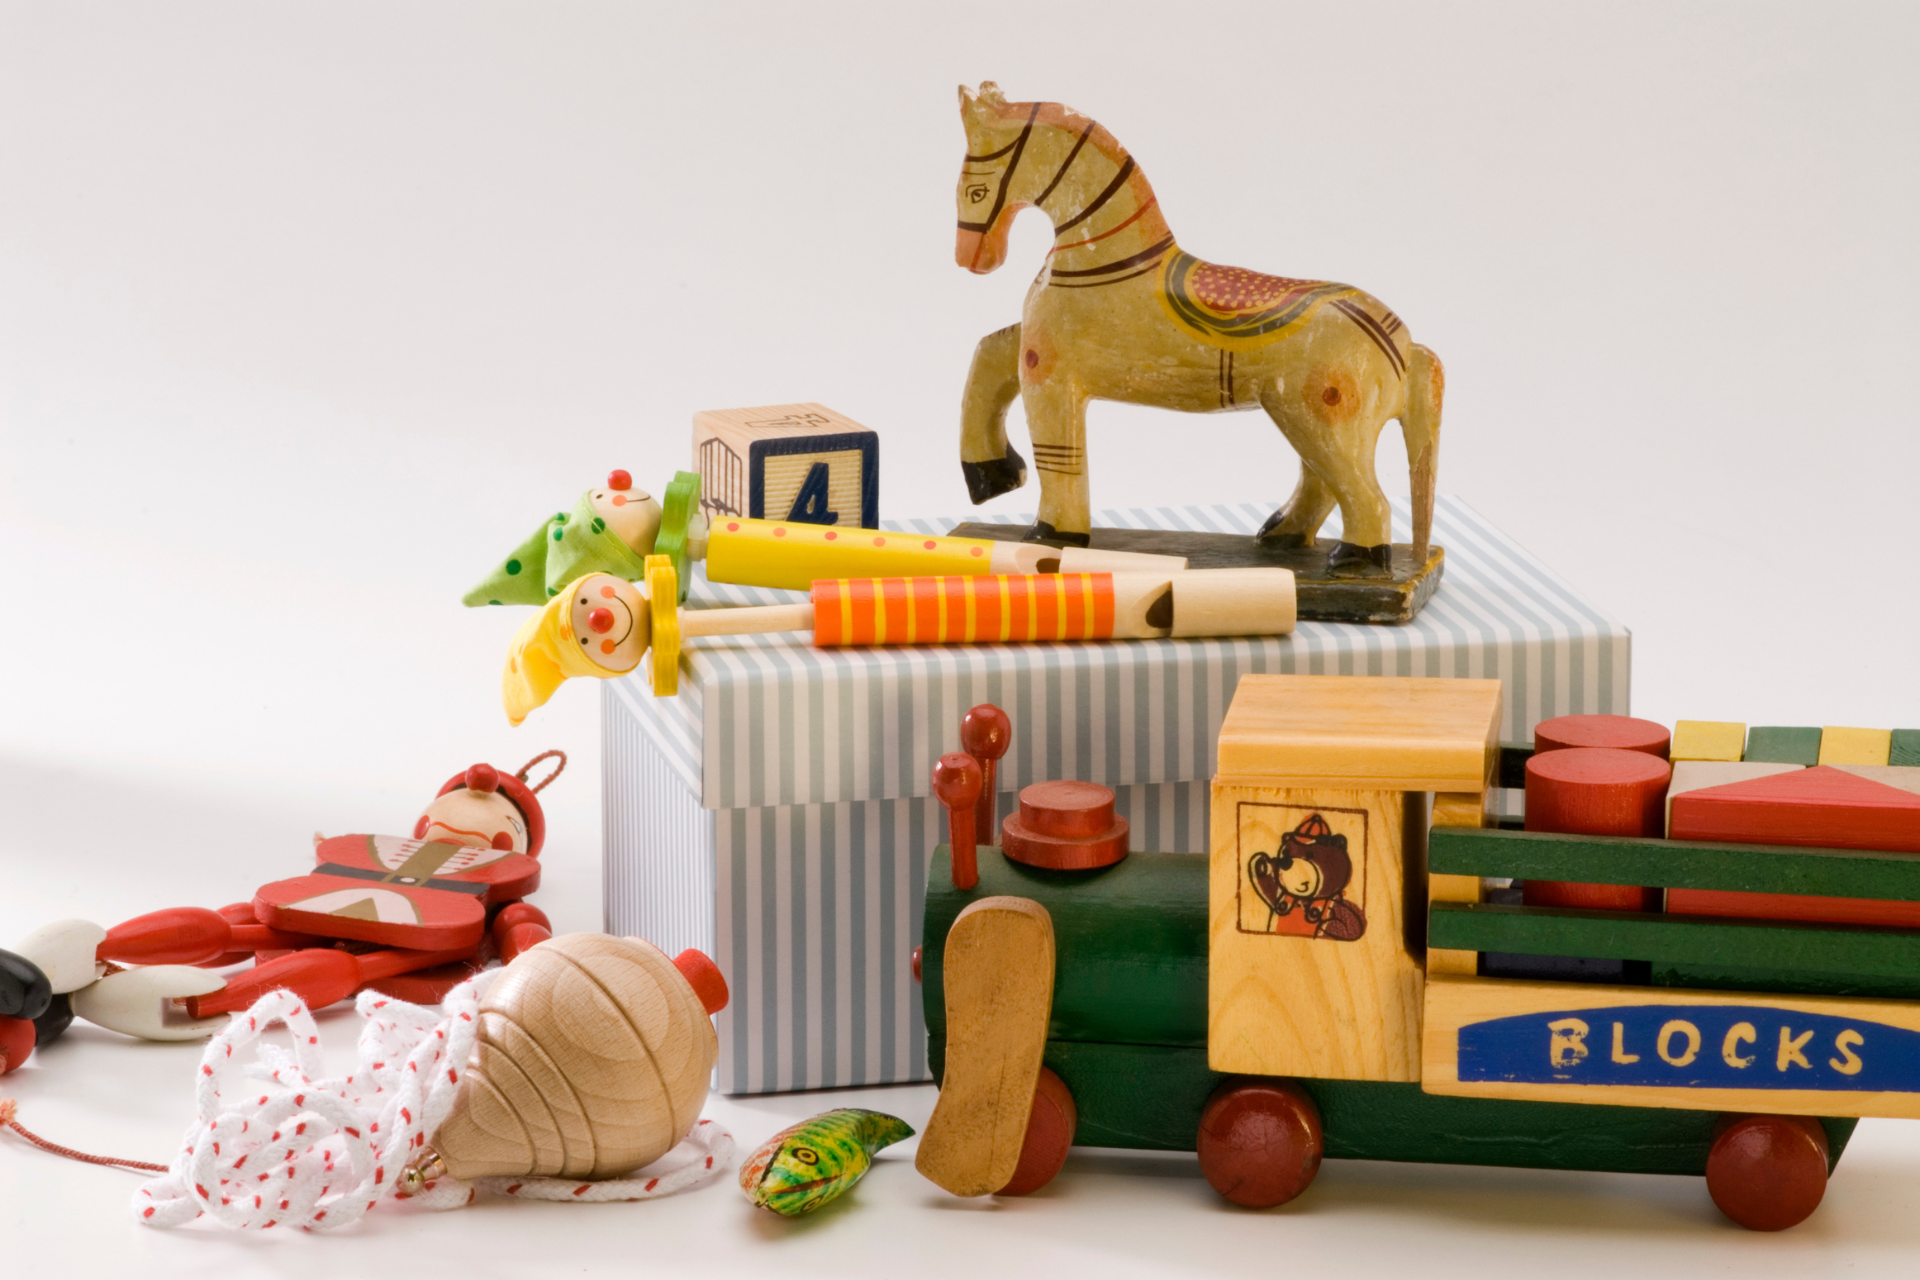 The Toy Library of Kilmore